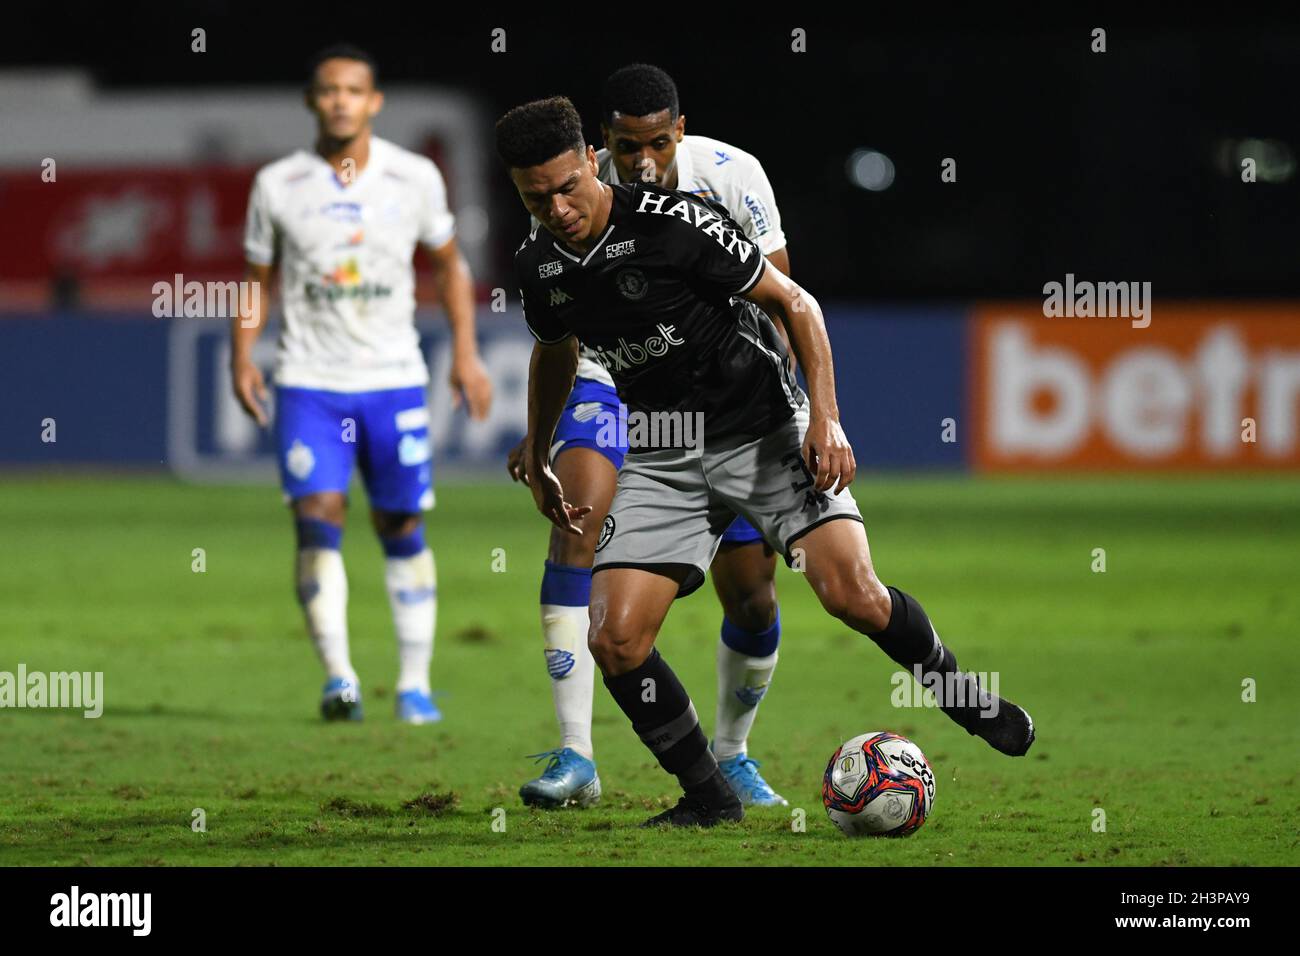 Rio De Janeiro, Brazil. 29th Oct, 2021. M. Gabriel during Vasco da Gama vs  CSA, a match valid for the 32nd round of the 2021 Brazilian Championship  (Serie B), held at the